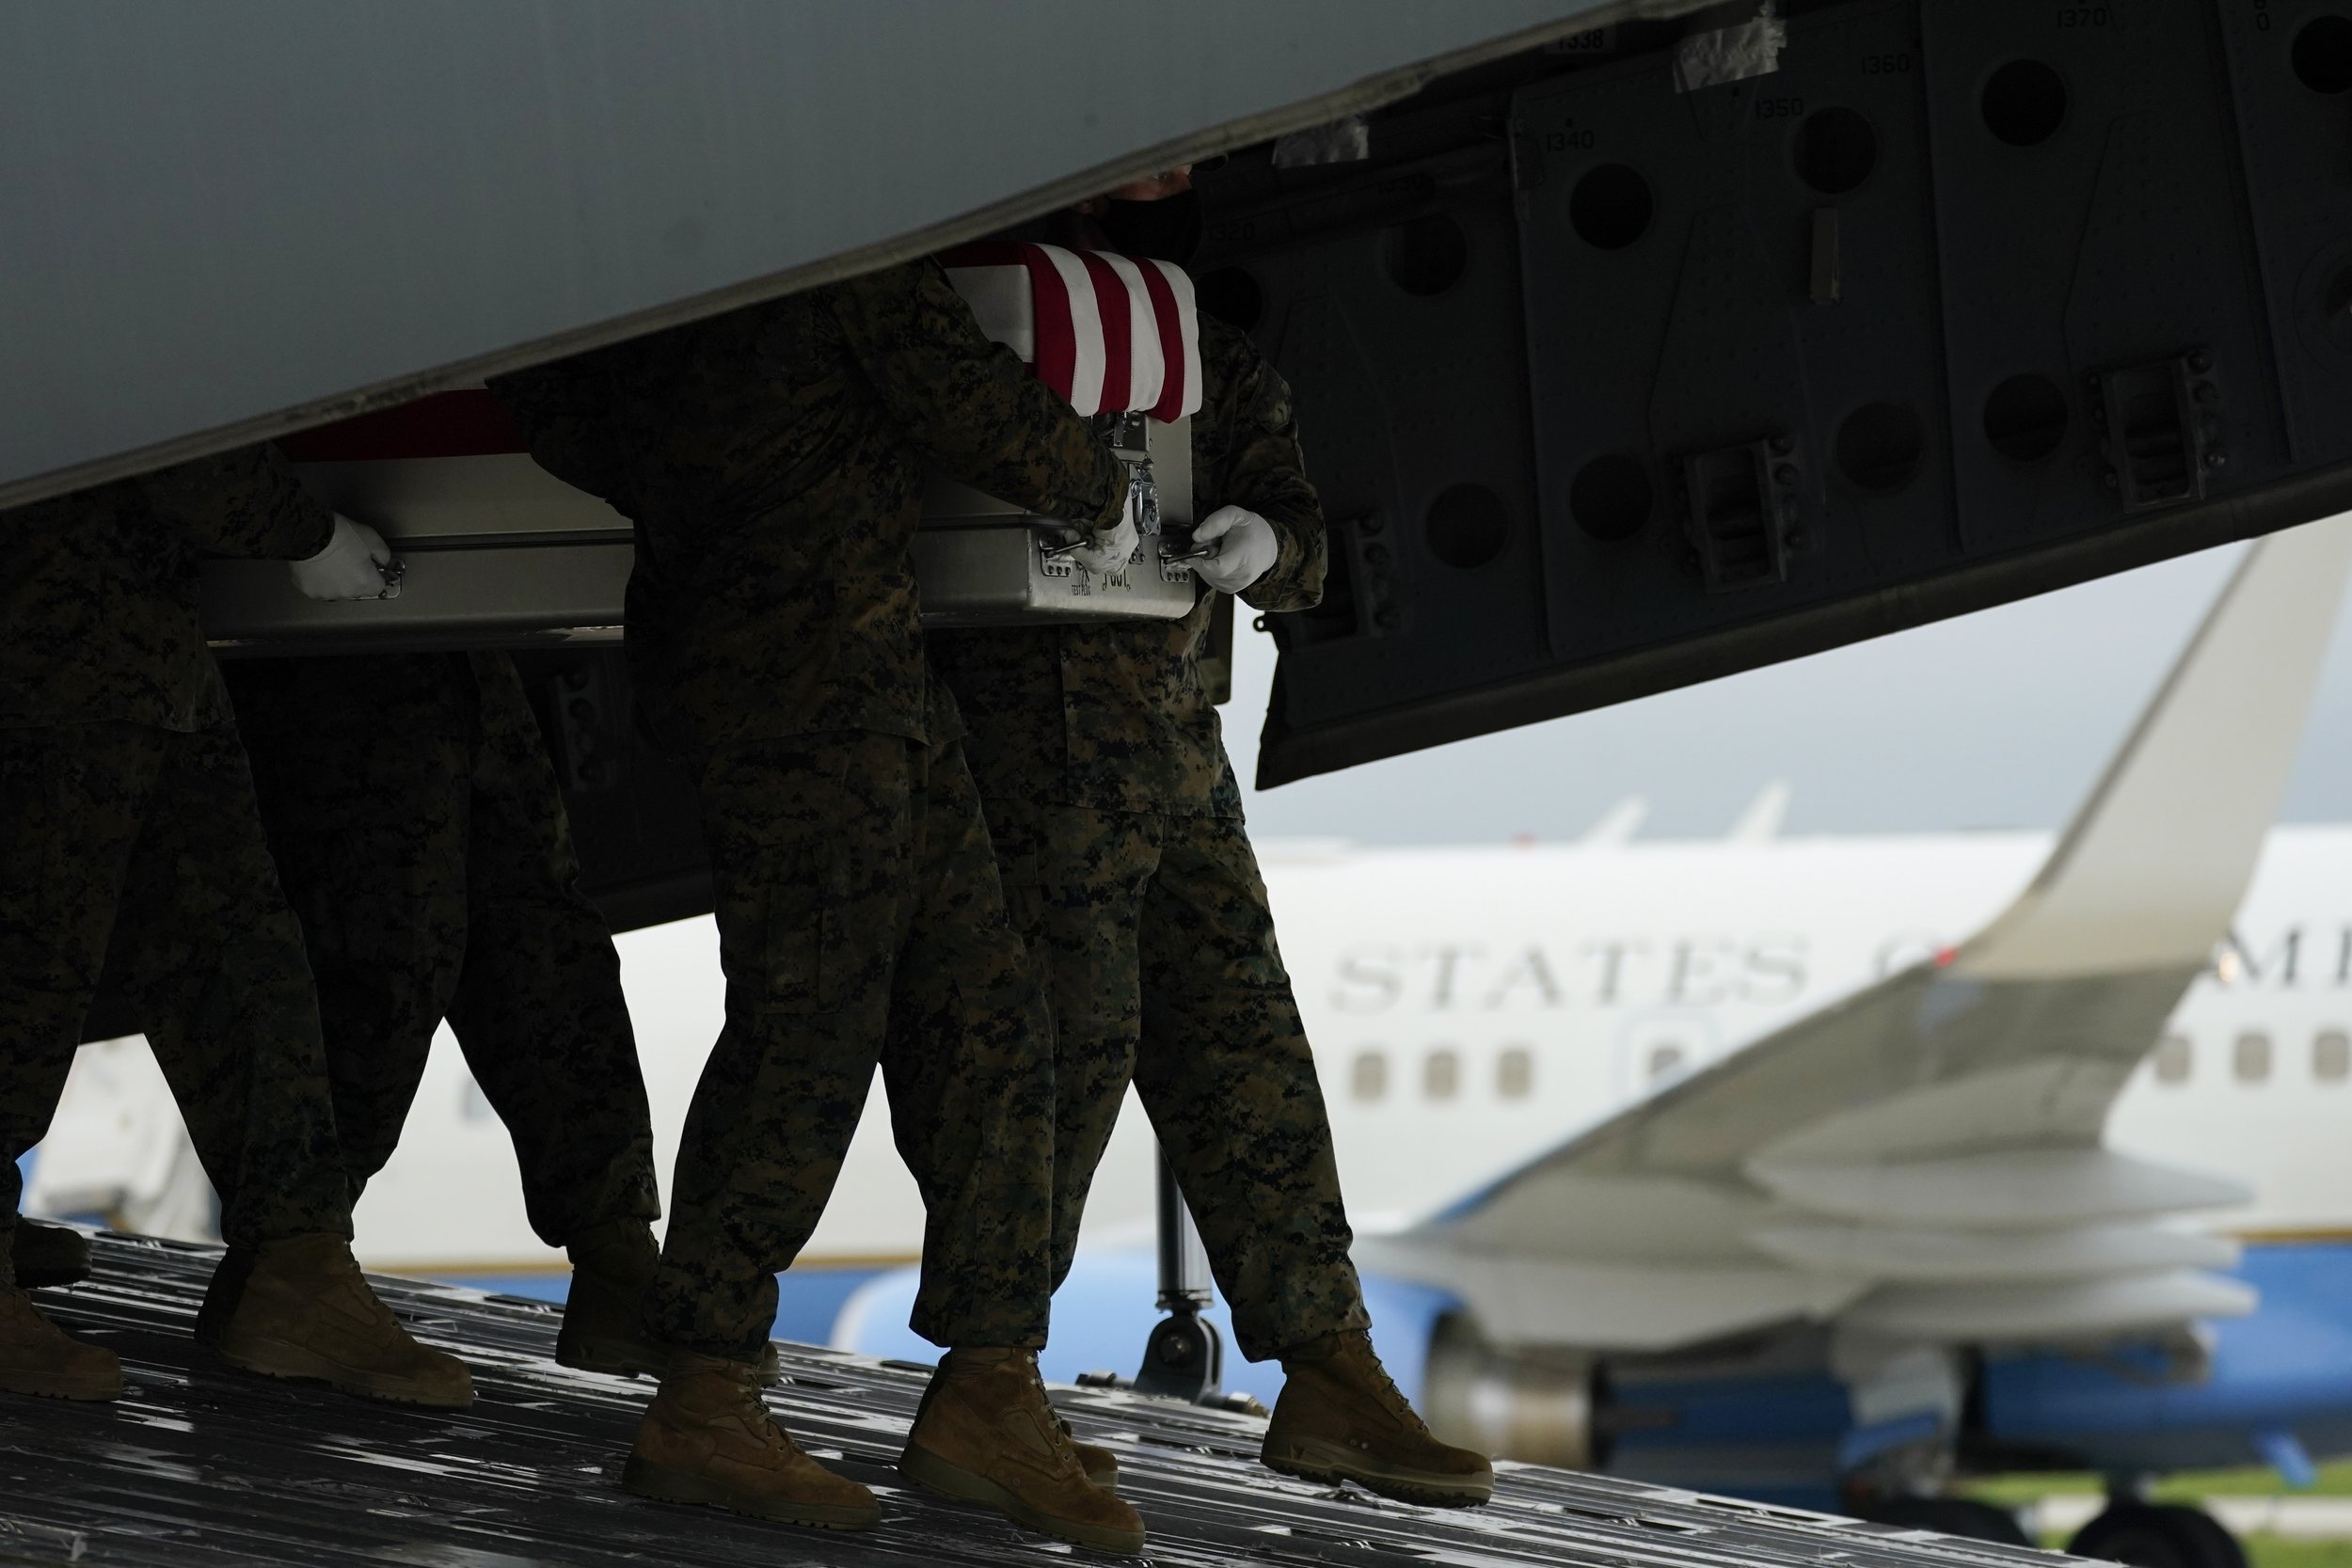  A carry team moves a transfer case containing the remains of Marine Corps Staff Sgt. Darin T. Hoover, 31, of Salt Lake City, on Aug. 29, 2021, at Dover Air Force Base, Del. According to the Department of Defense, Hoover died in an attack at Afghanis